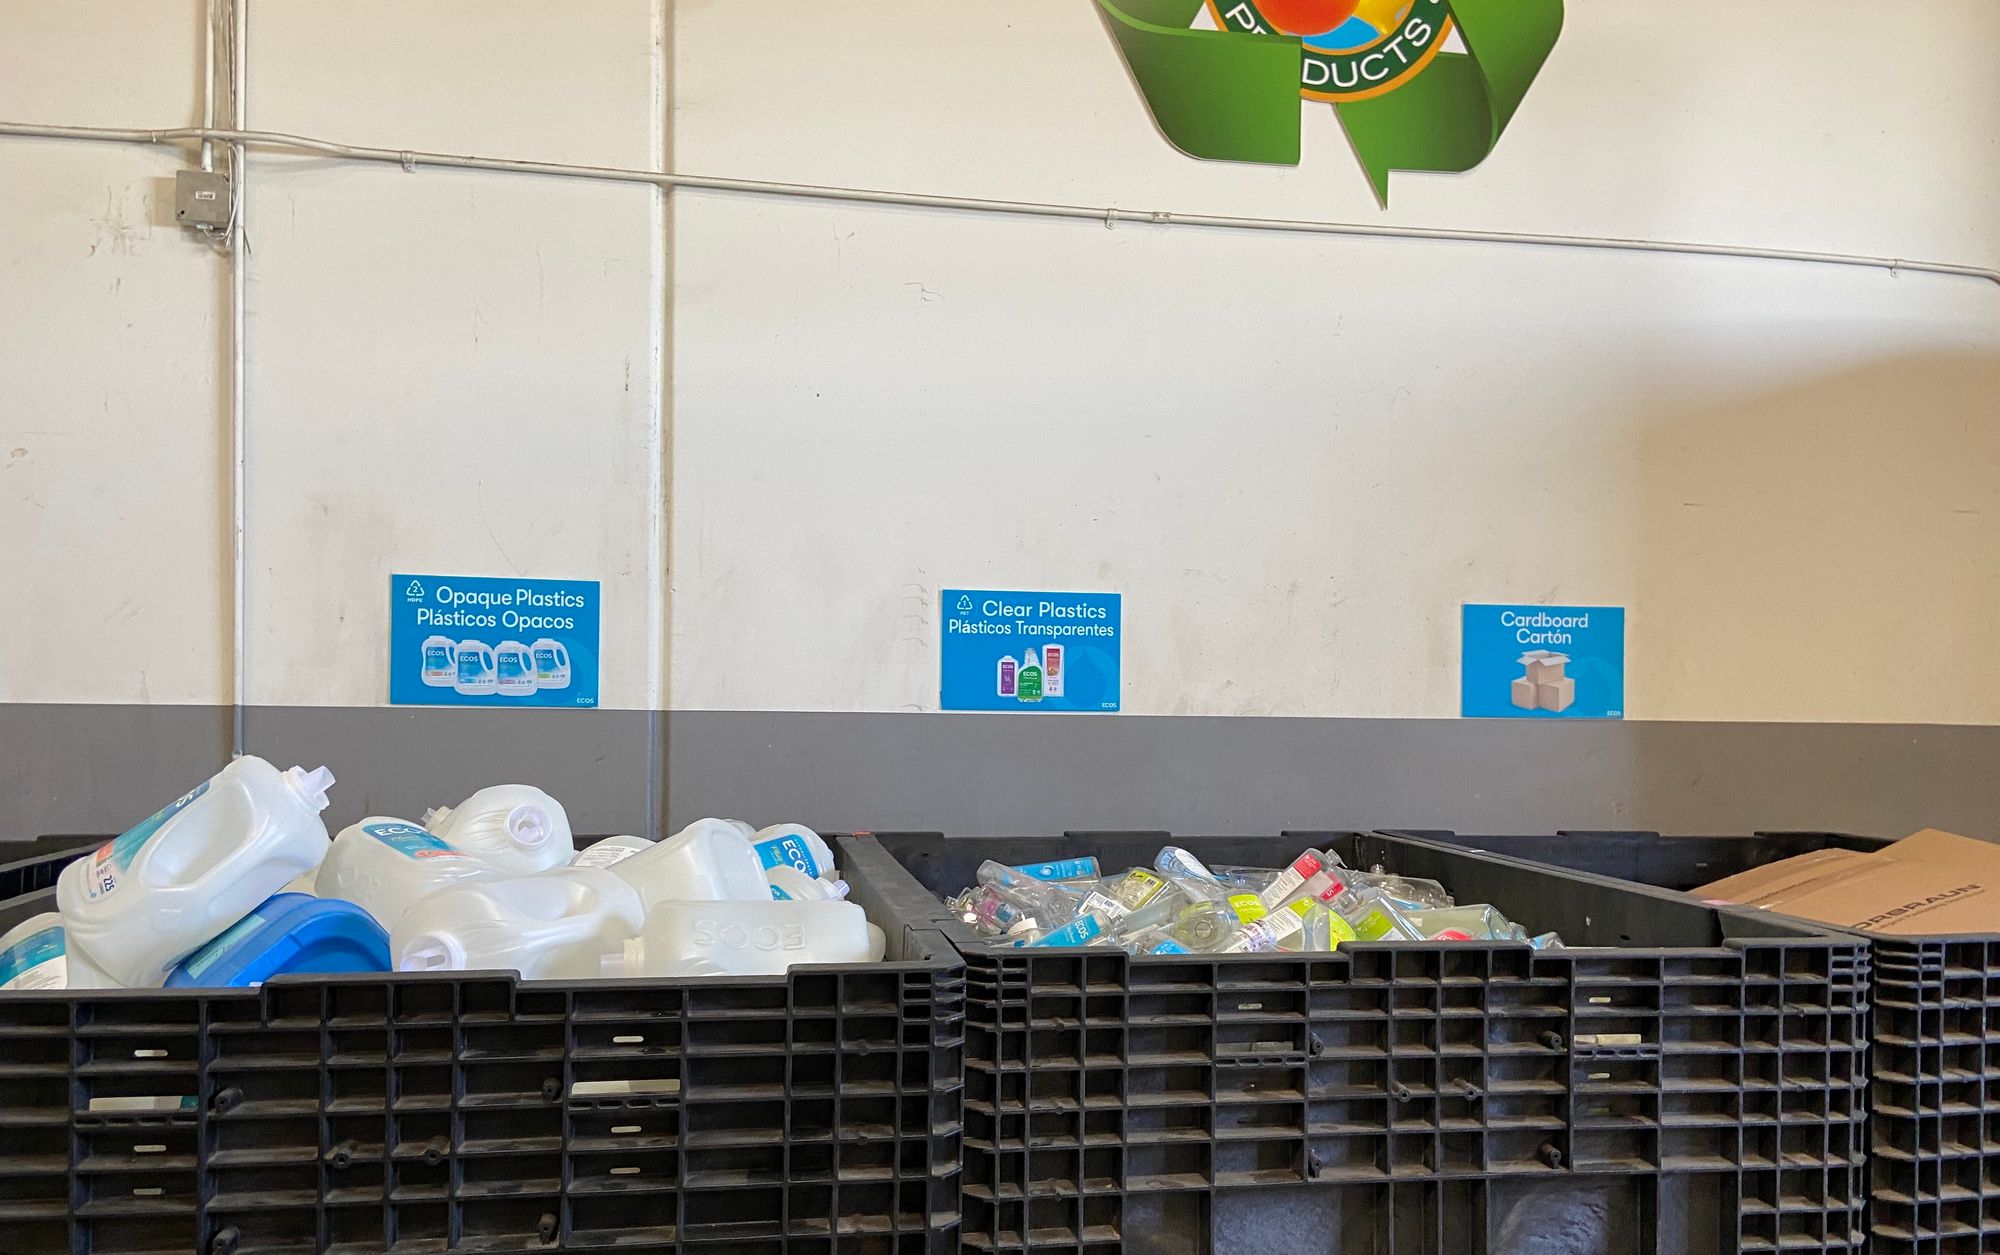 Recycling bins at Ecos separated with separate bins for opaque plastics, clear plastics and cardboard cartons